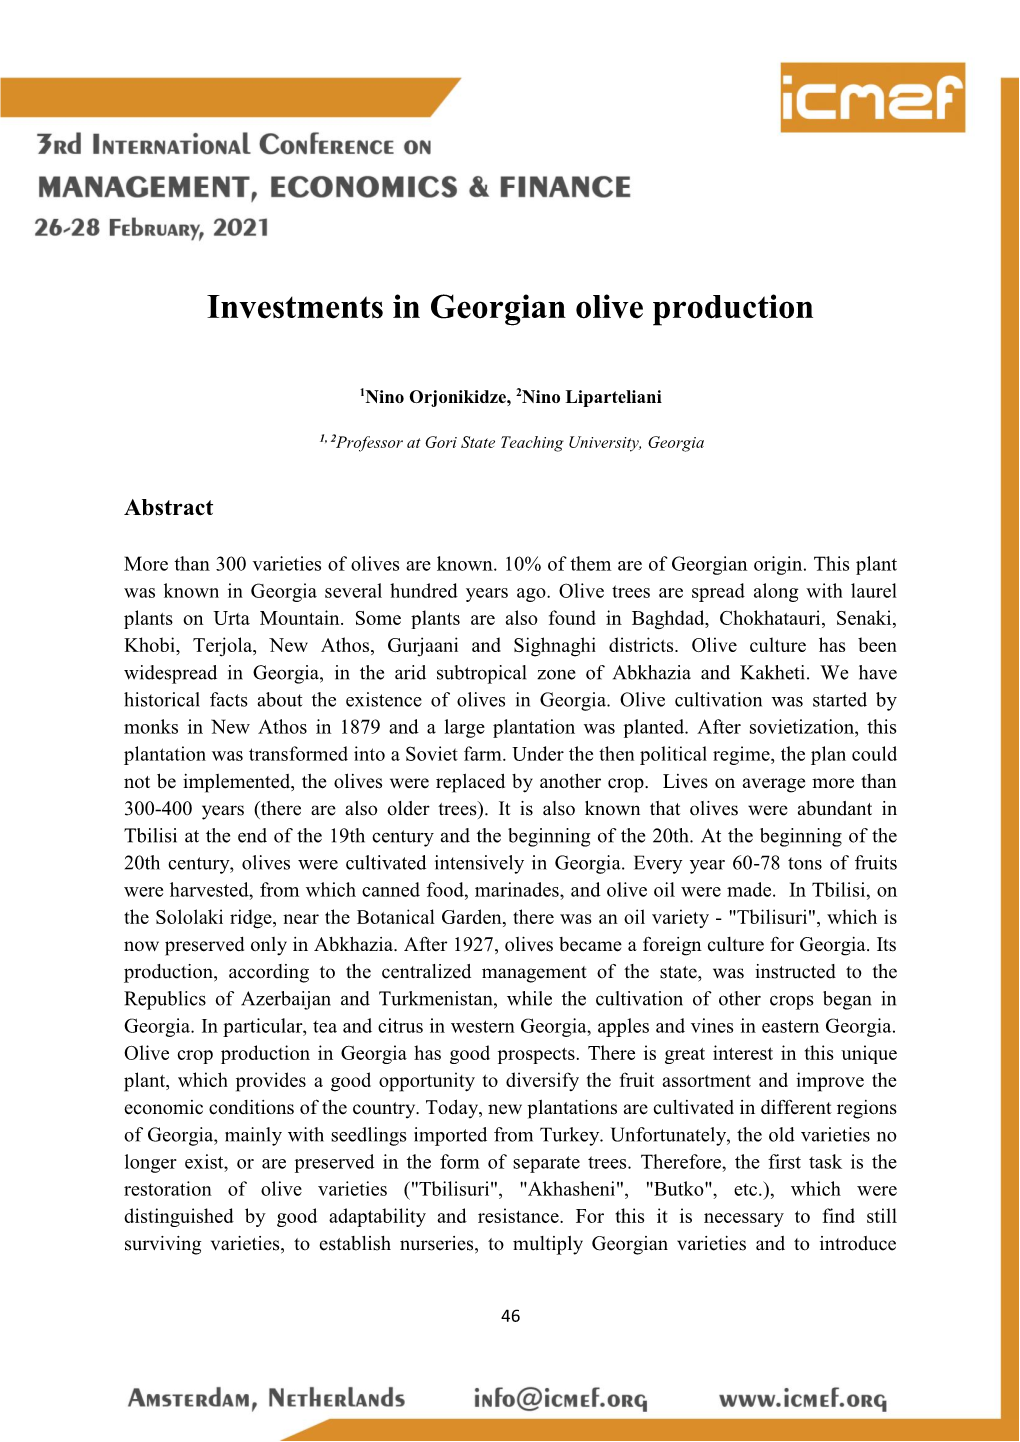 Investments in Georgian Olive Production